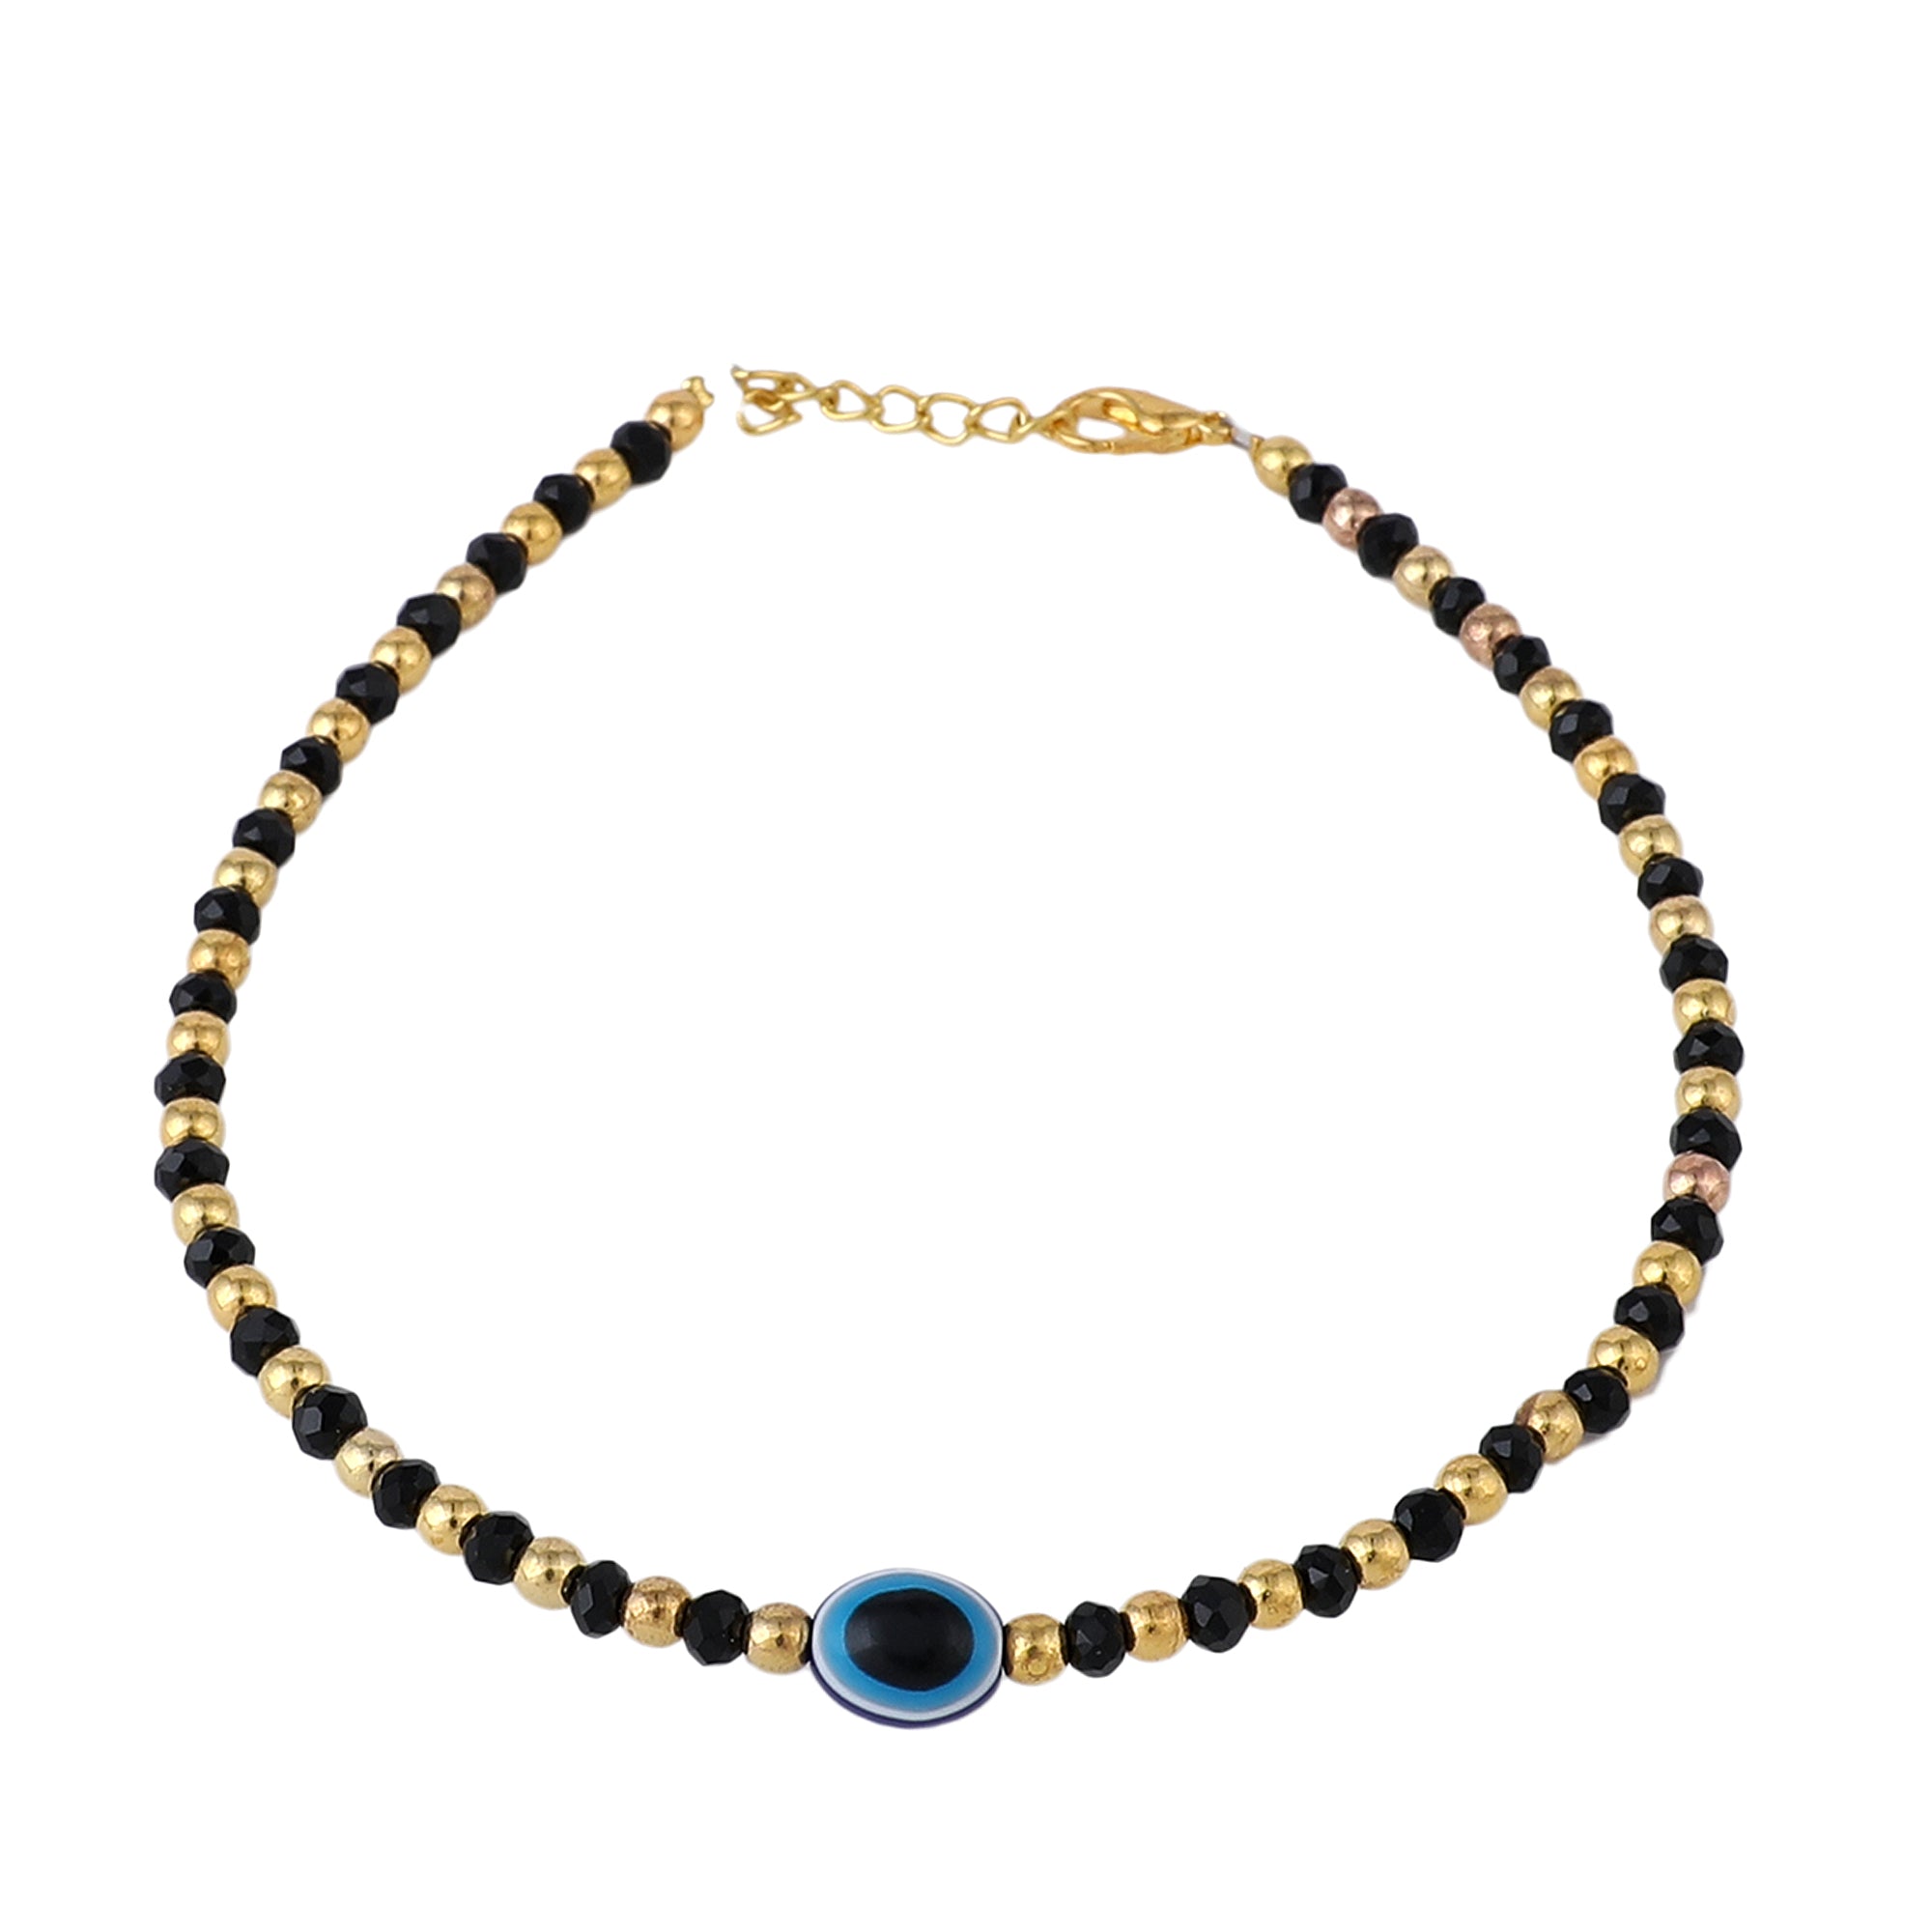 Women's Set Of 2 Gold-Plated Black & Blue Beaded Hand Crafted Anklets - Anikas Creation